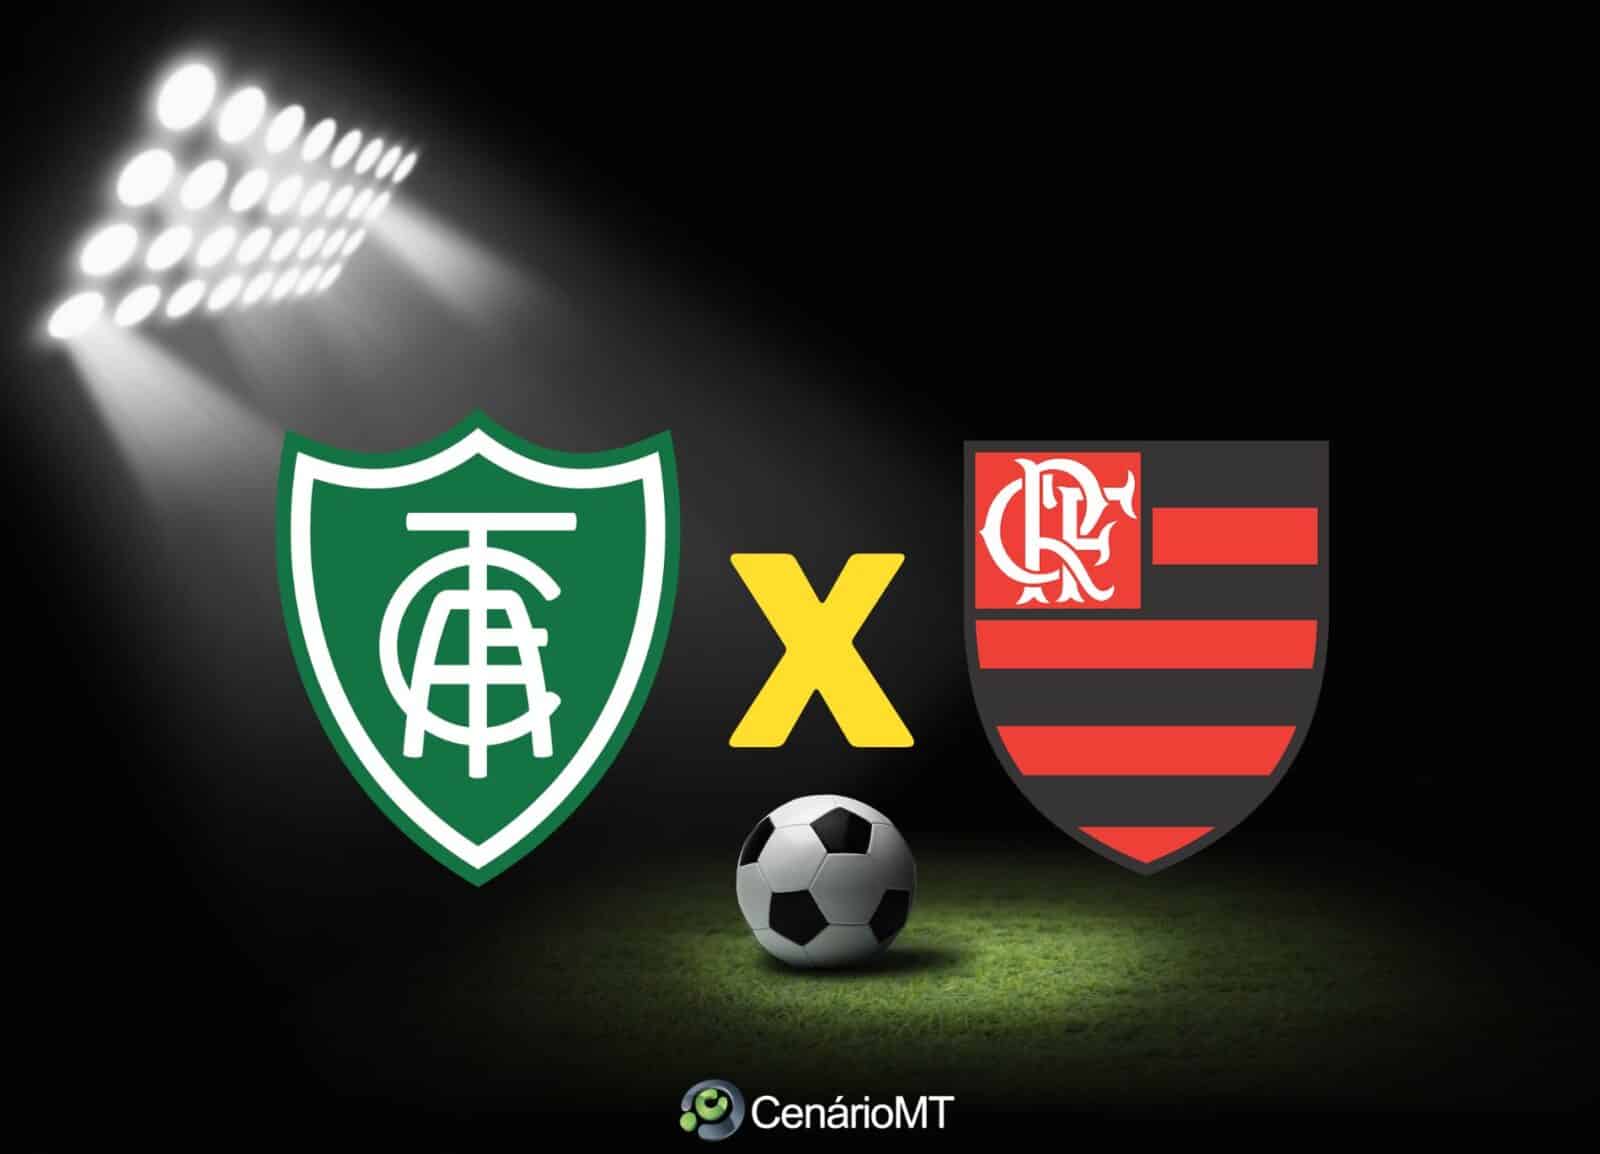 America MG vs Flamengo: An Exciting Clash of Football Titans